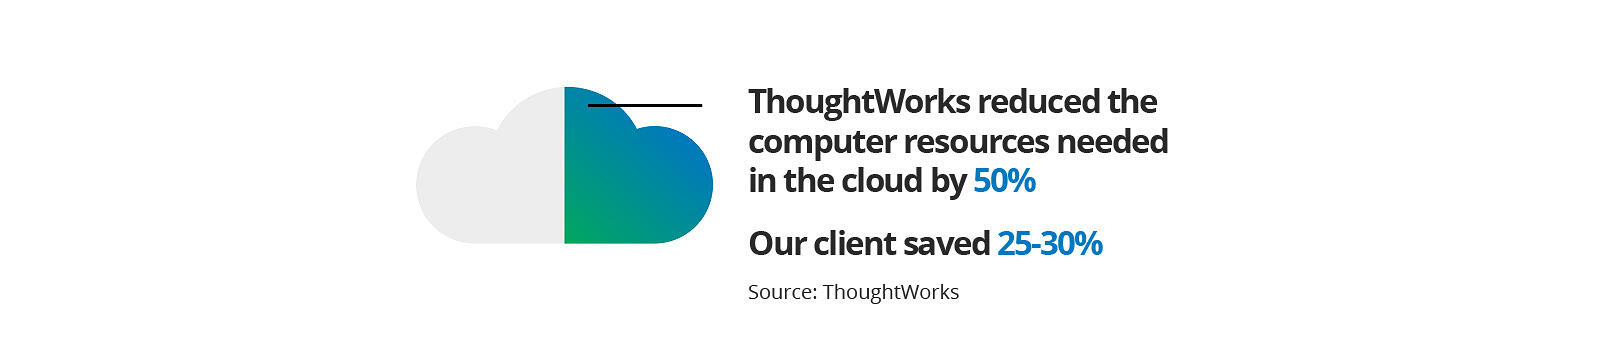 Optimizing applications for the cloud can result in significant savings